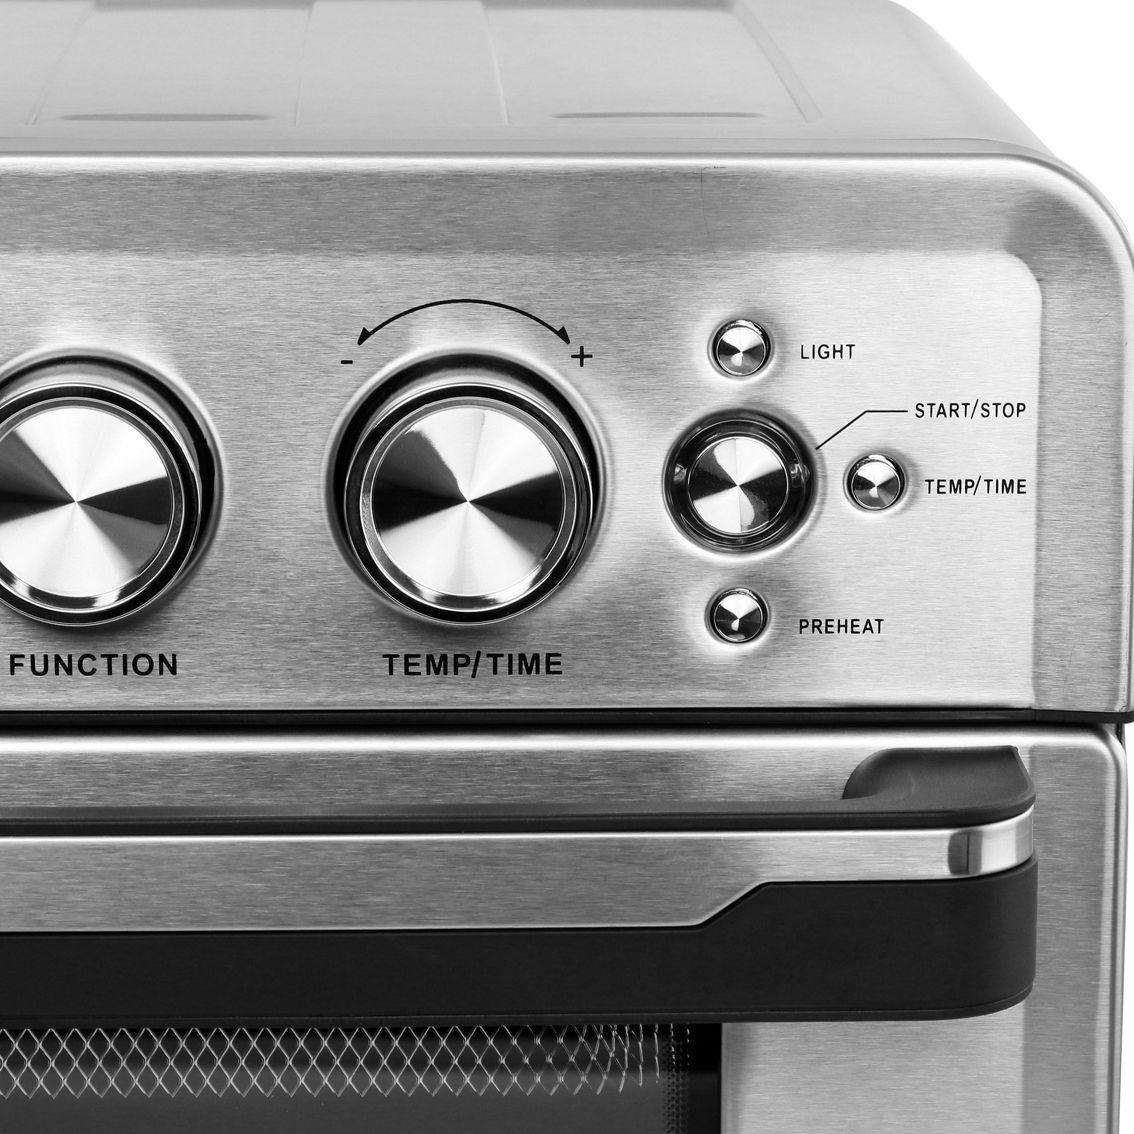 MegaChef Multifunction Air Fryer Toaster Oven with 21 Presets - Image 4 of 5